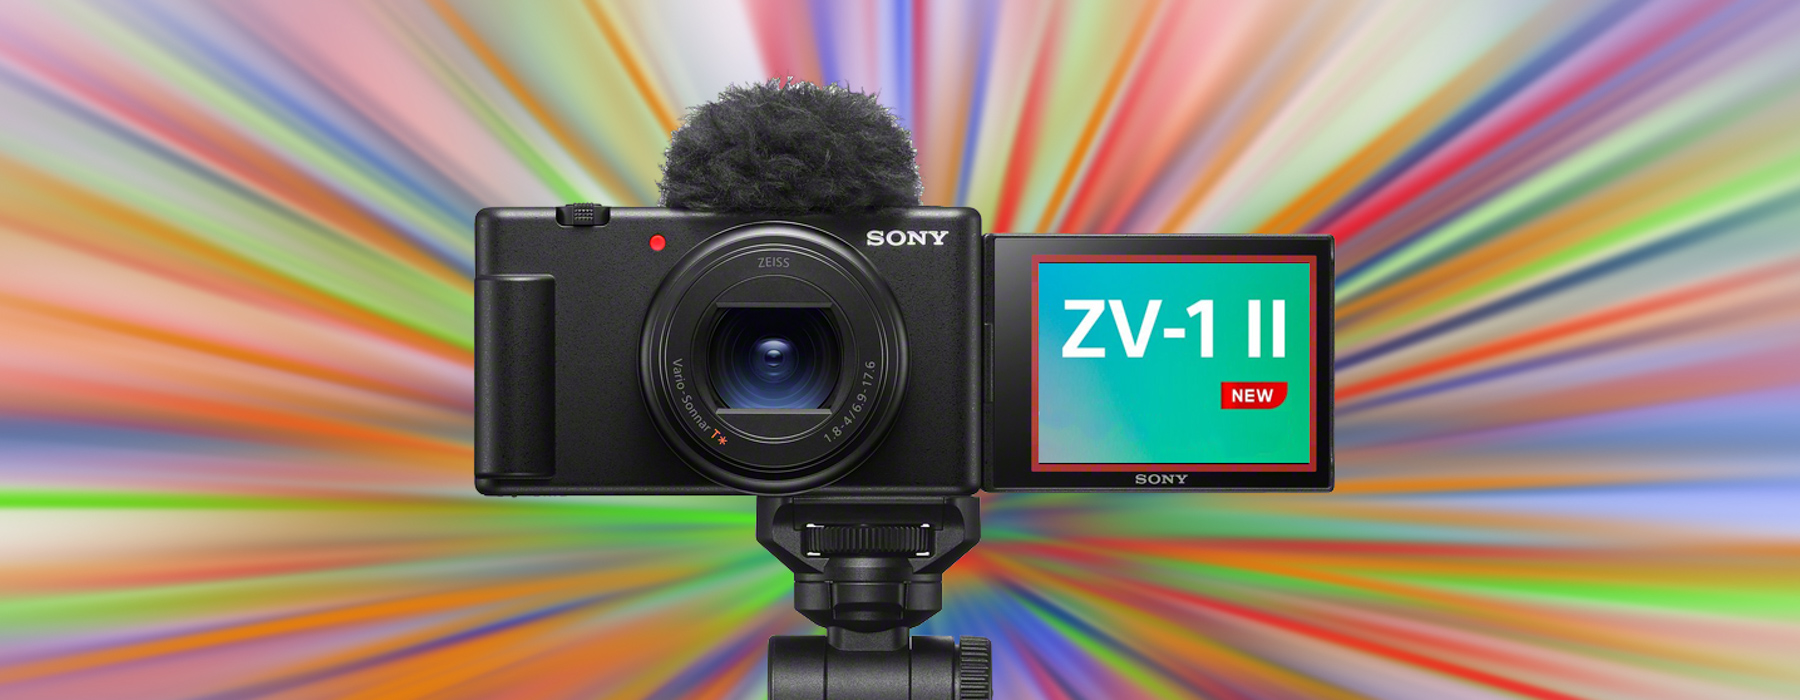 Sony ZV-1II Hands on Review